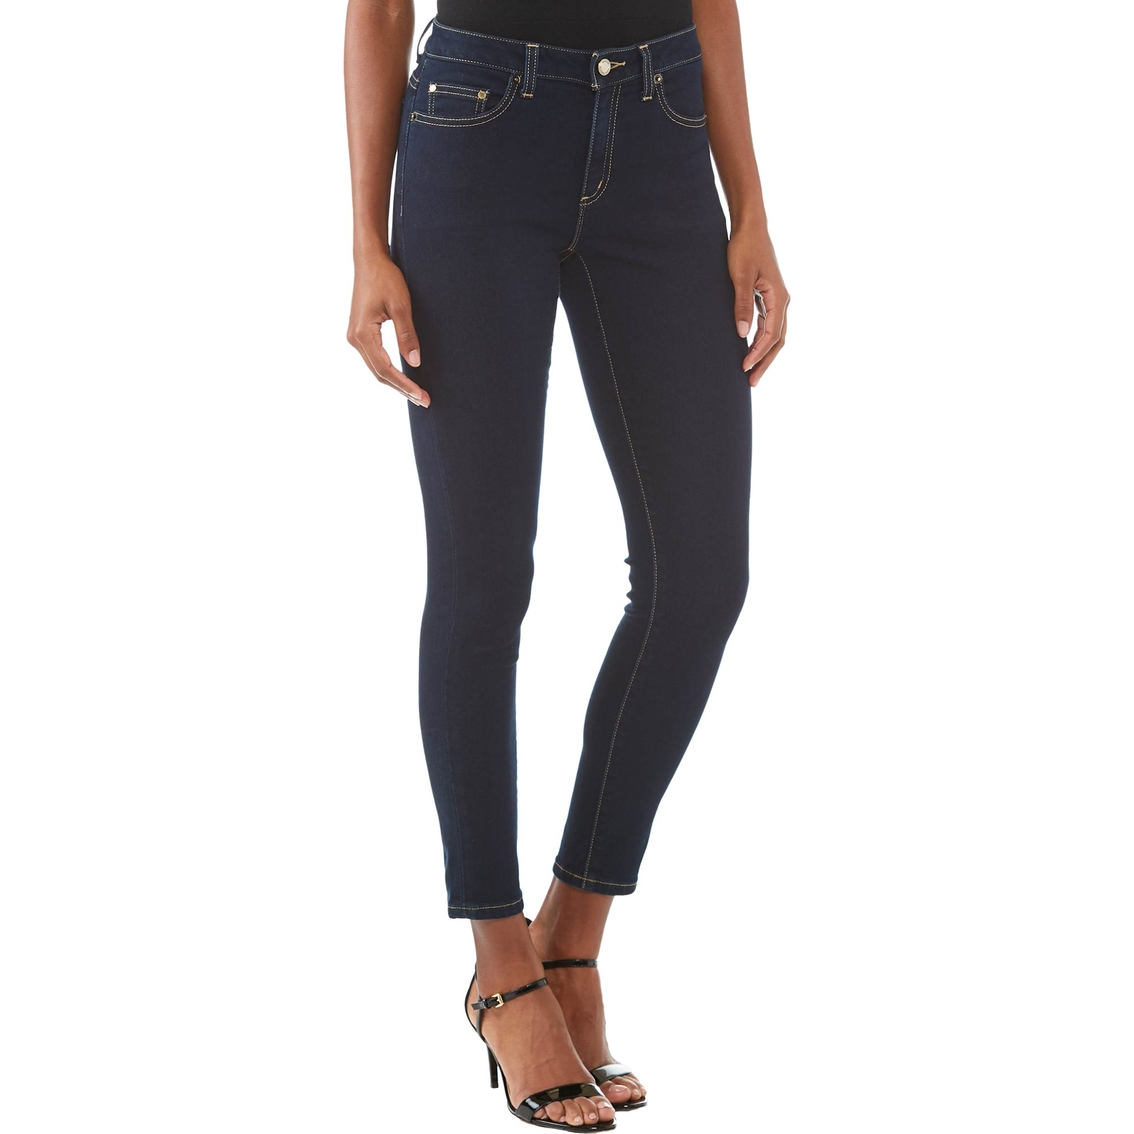 Michael Kors Stretch High Rise Skinny Jean - Image 3 of 3